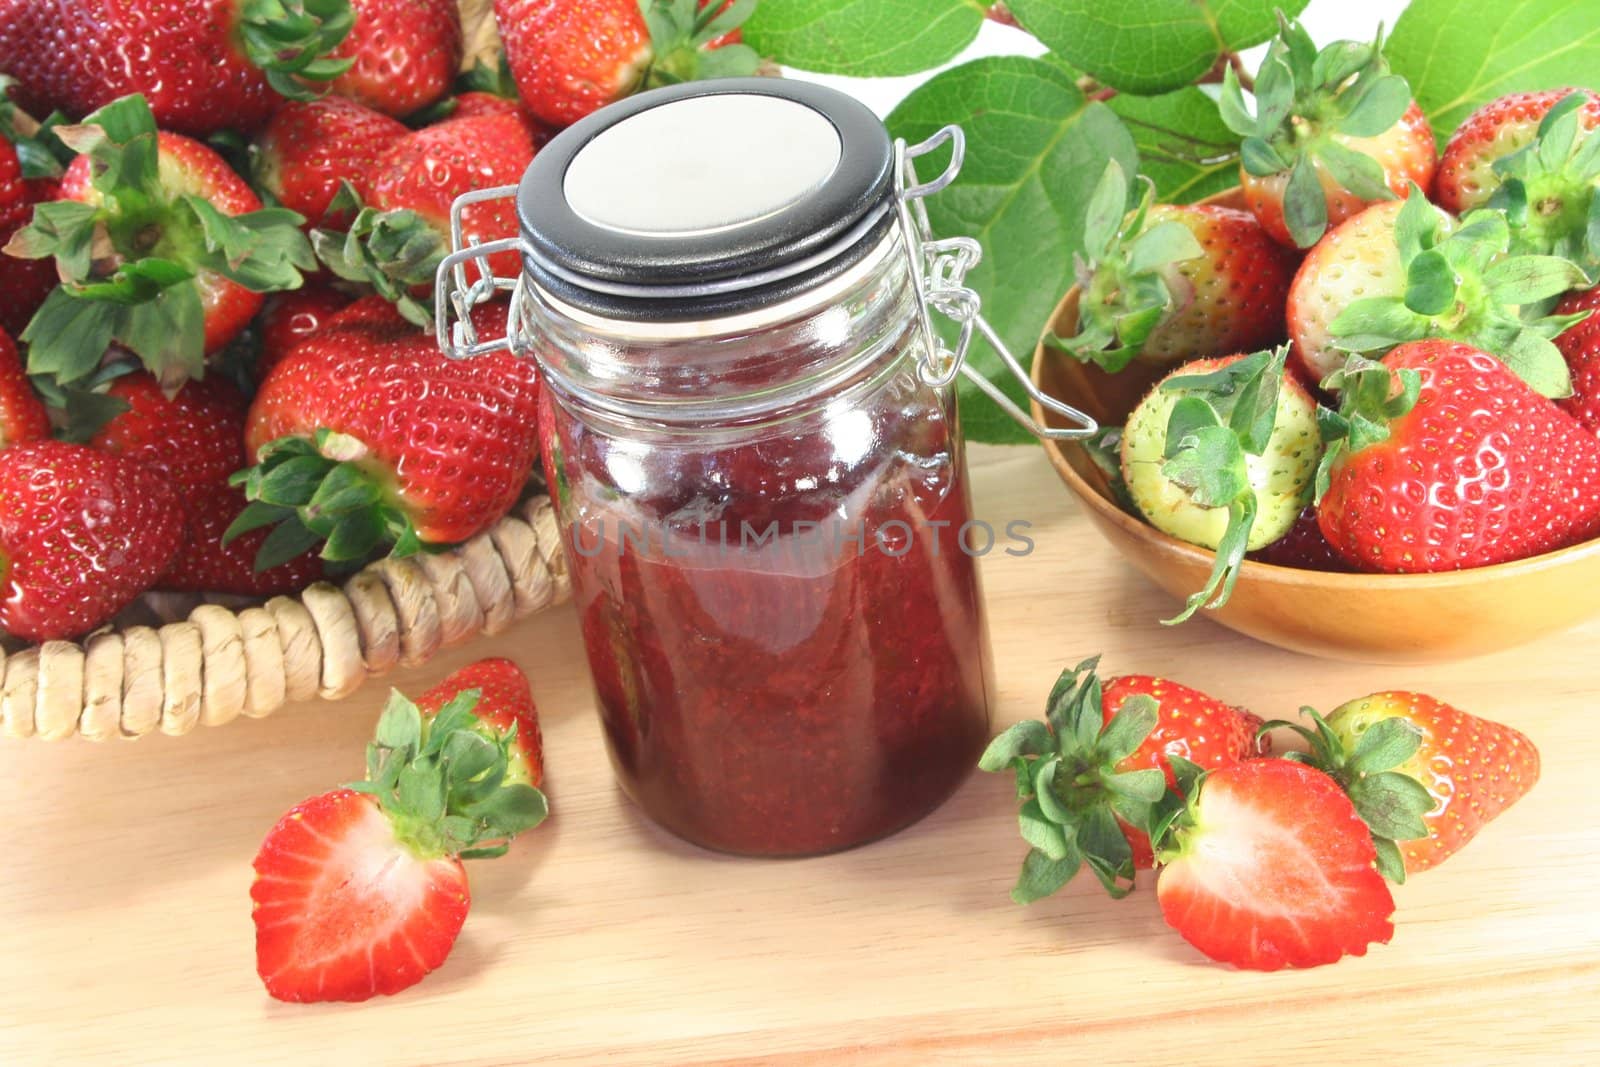 Strawberry jam by discovery